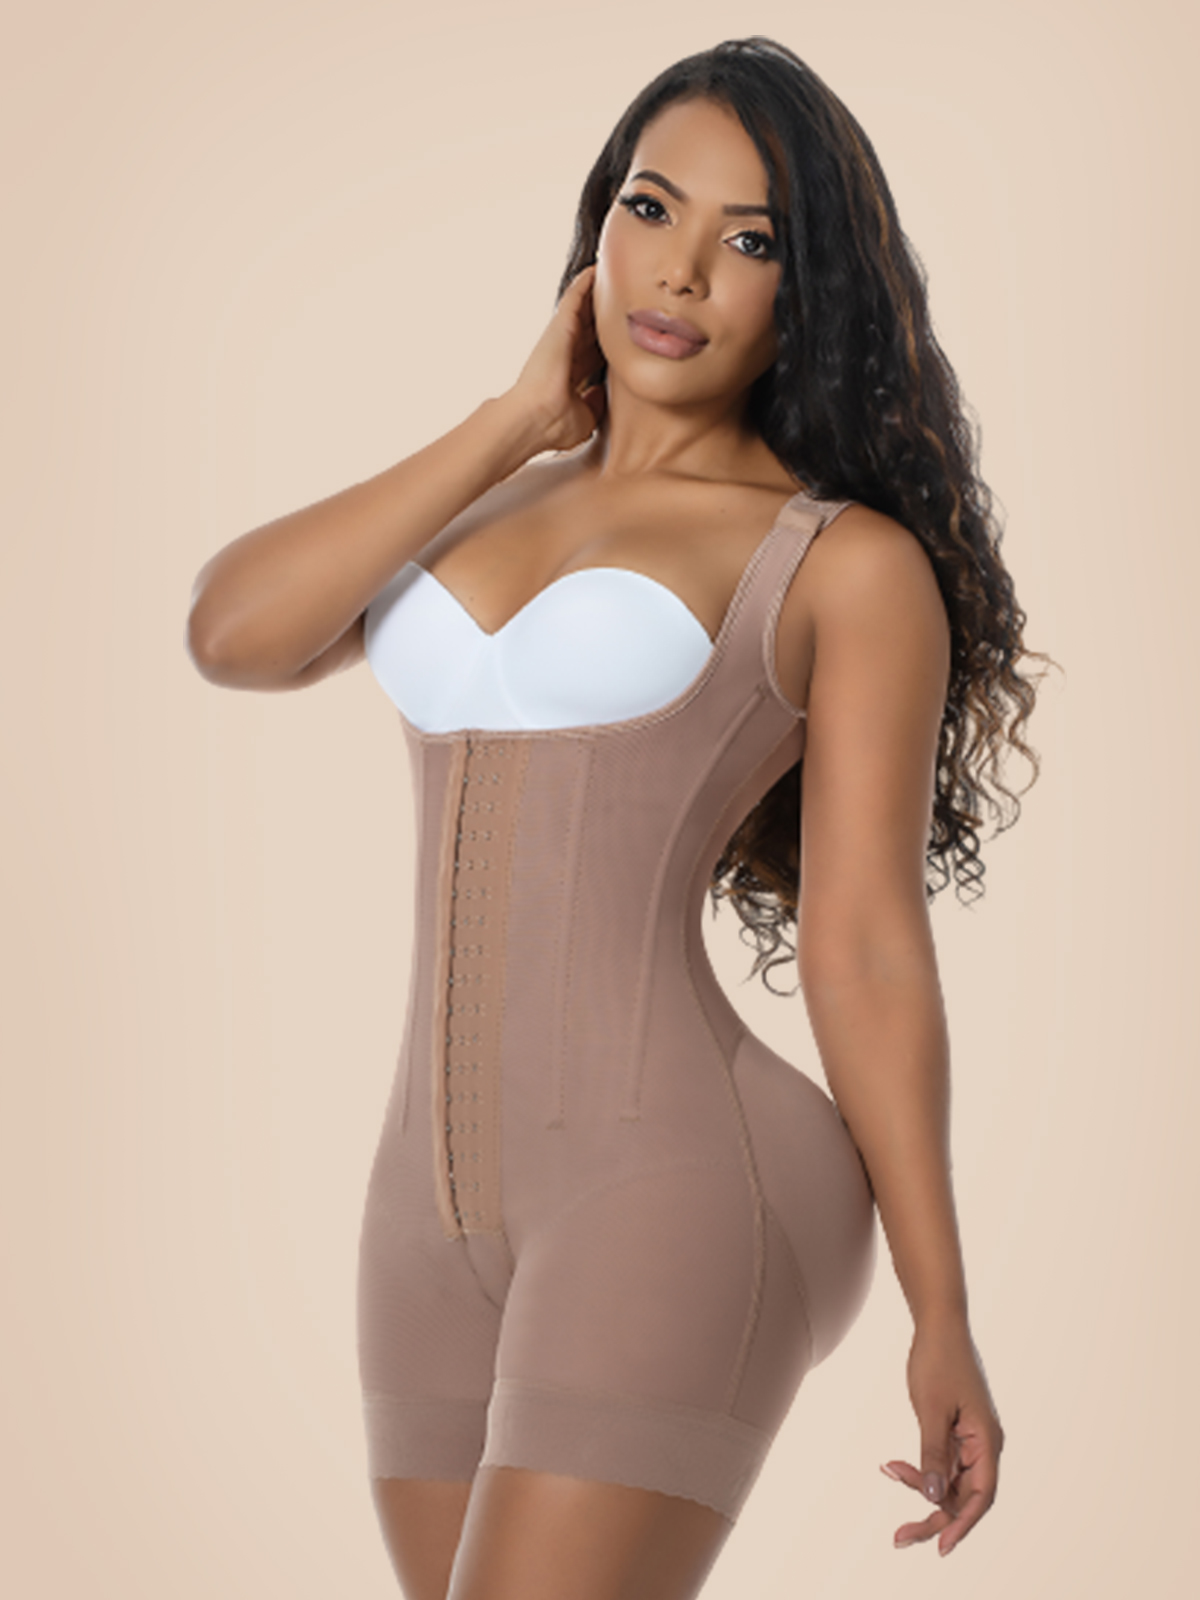 ChicCurve Women's High-Waisted Butt Lifter Shapewear JM3 Brown Size XL NWT